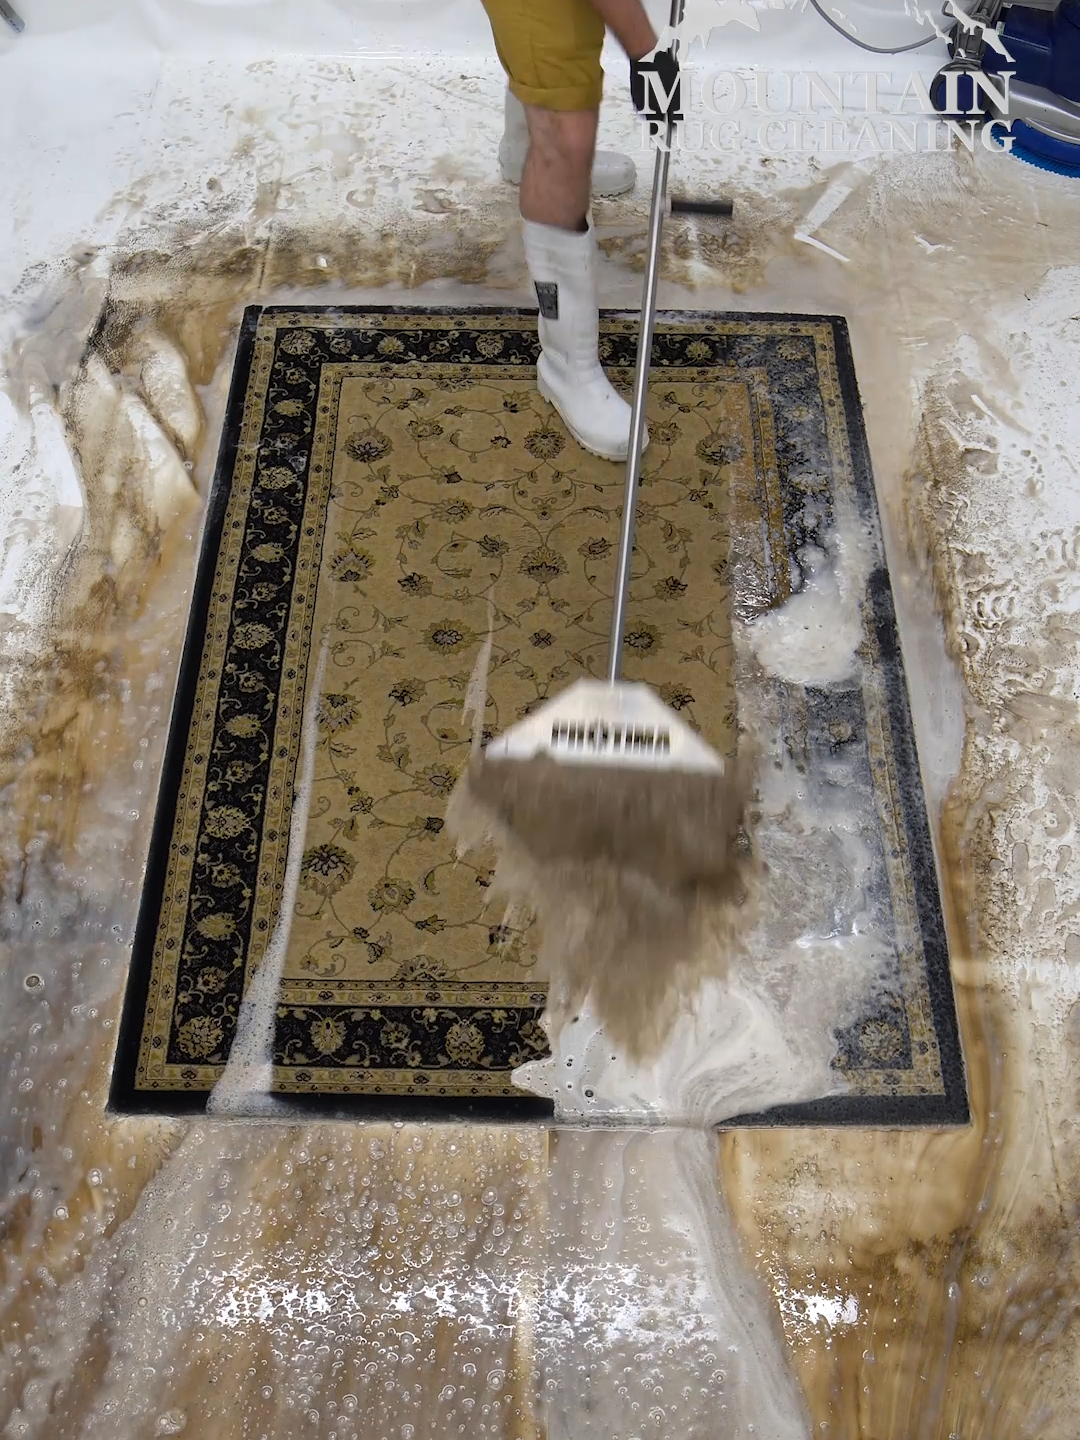 Deep Cleaning This Discarded Elegant Rug. ASMR Carpet Cleaning Timelapse.